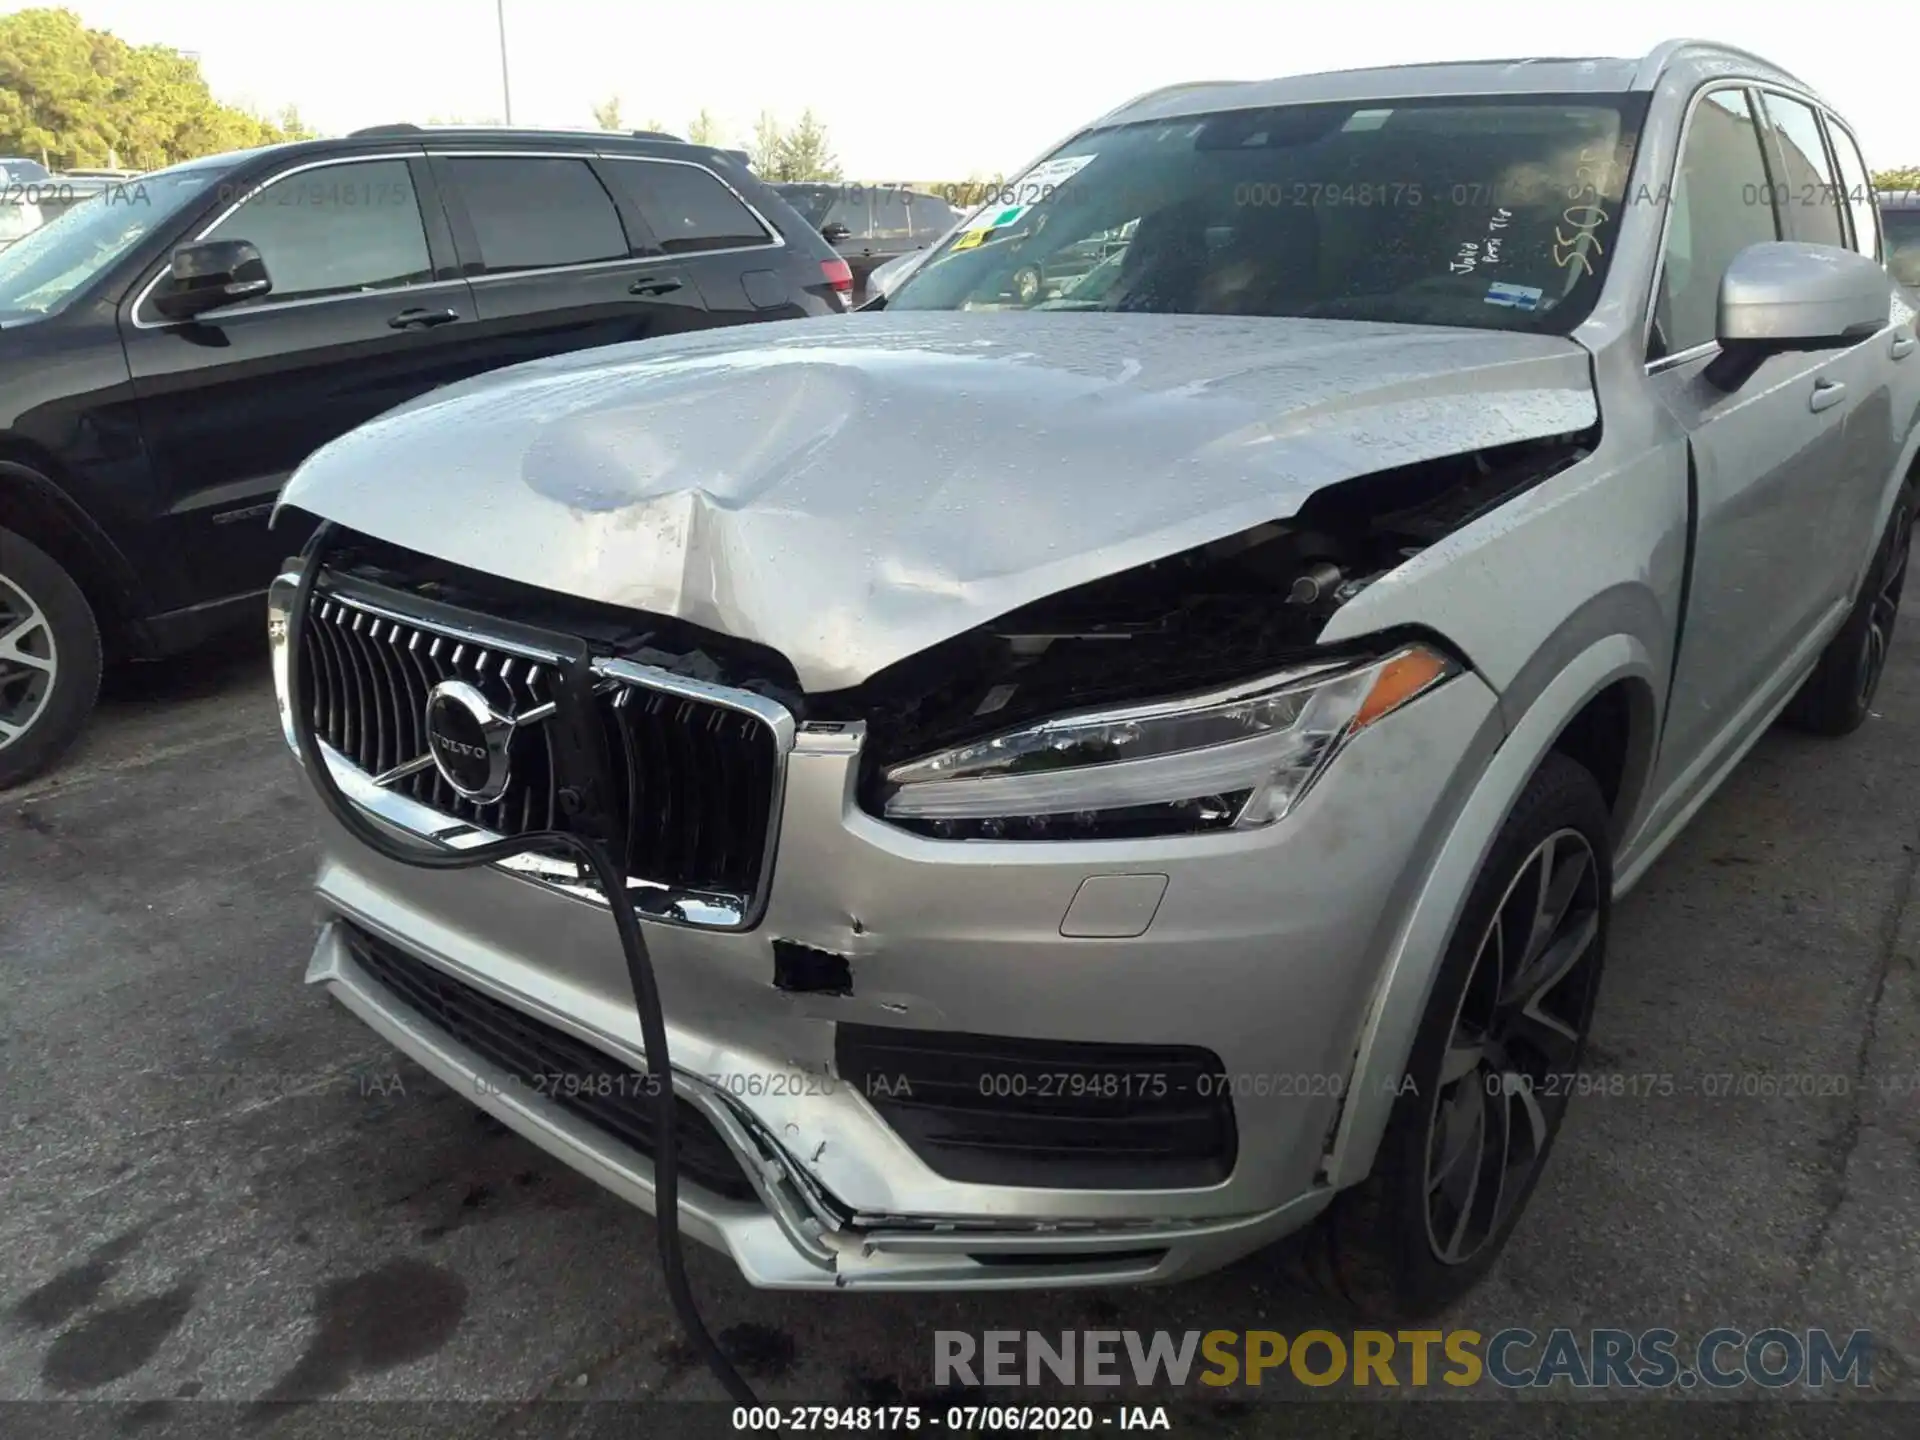 6 Photograph of a damaged car YV4A221K0L1550935 VOLVO XC90 2020